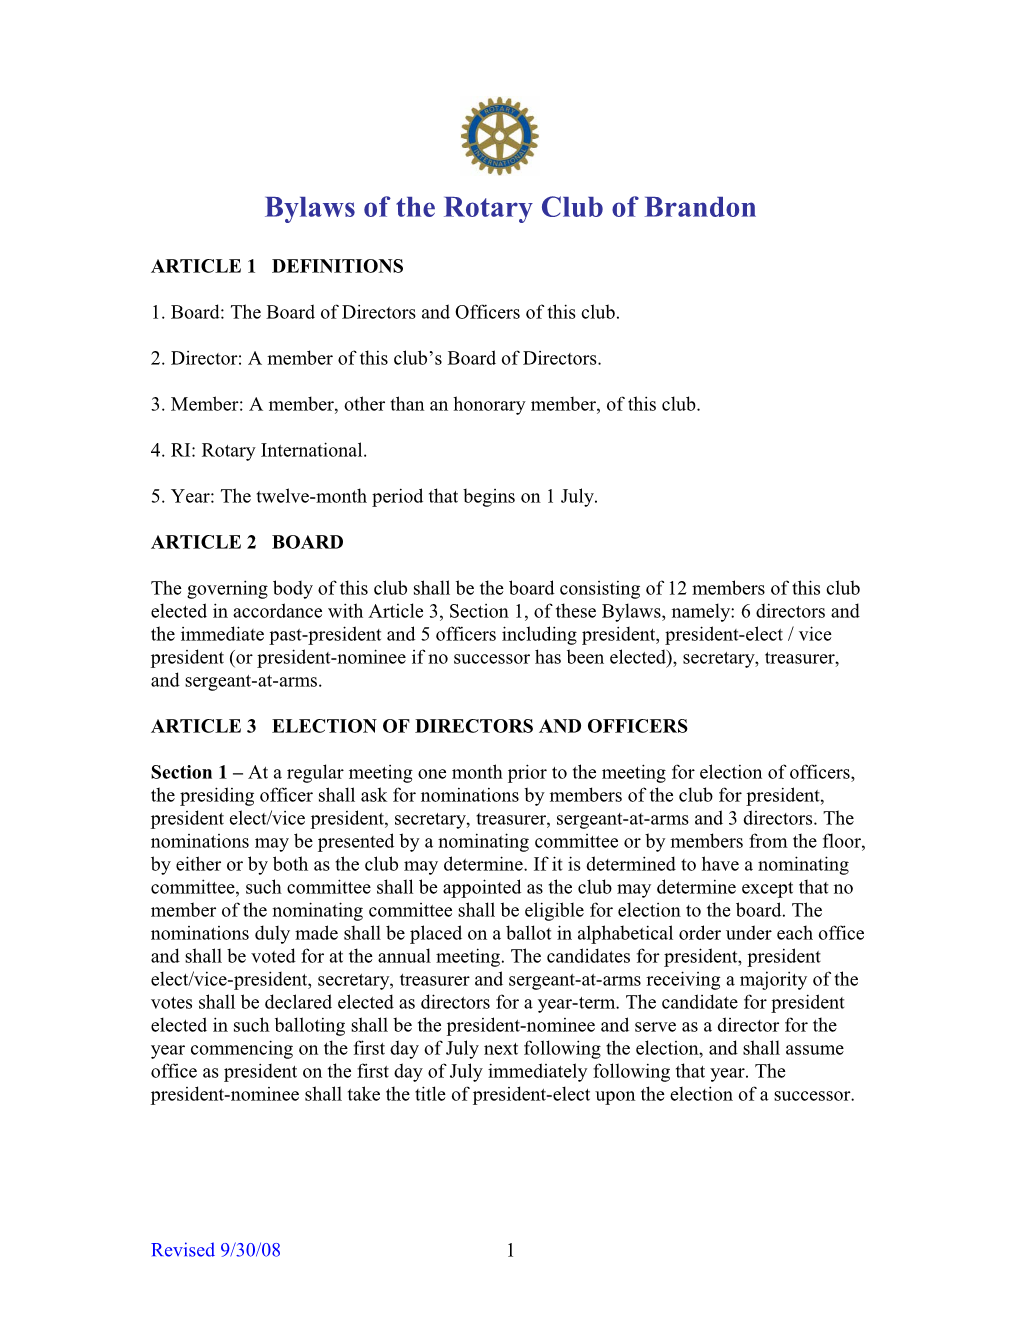 Bylaws of the Rotary Club of Brandon